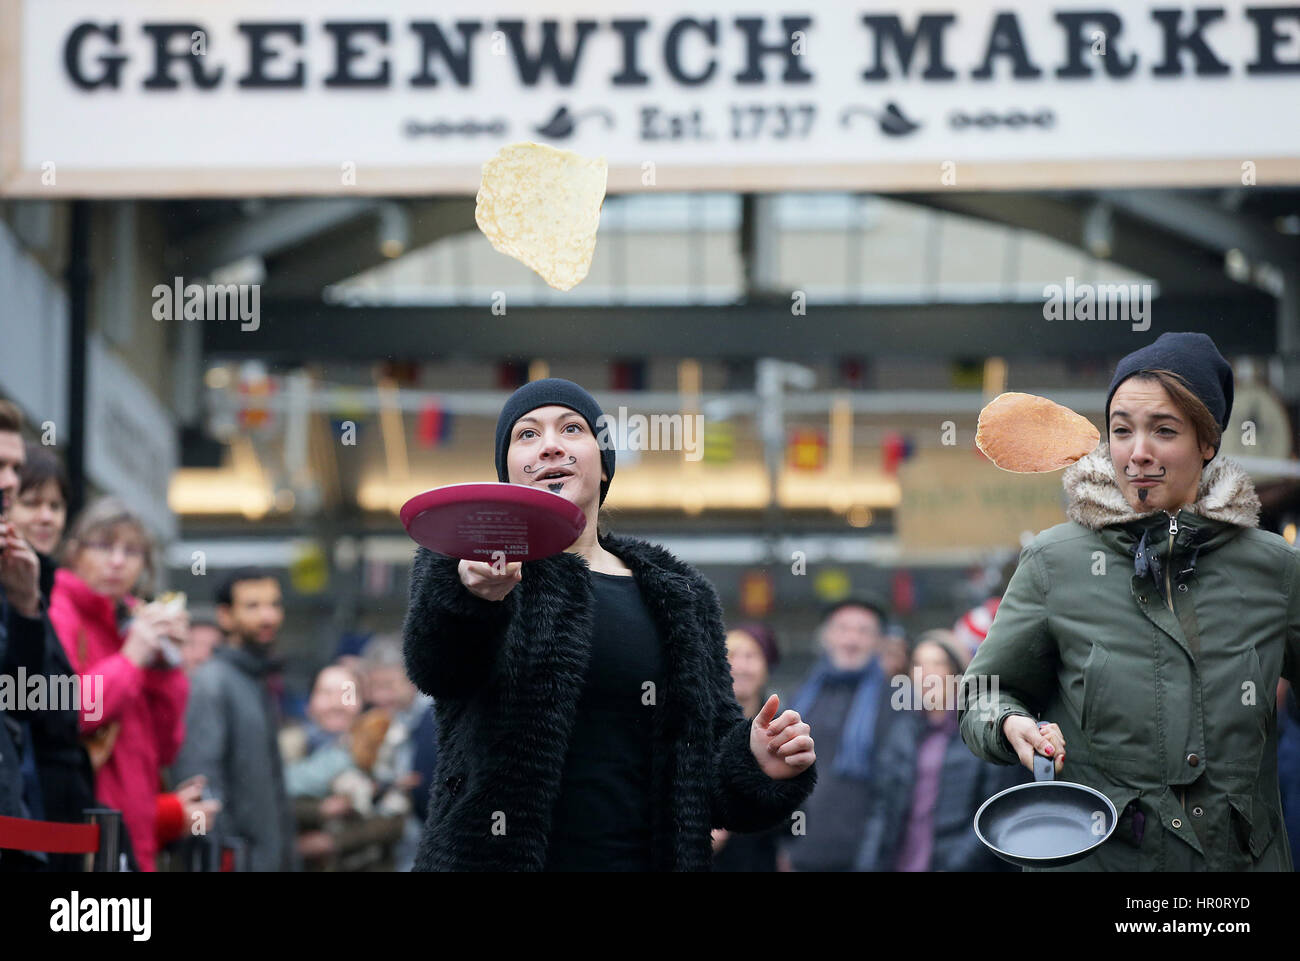 London, UK. 25th Feb, 2017. People take part in an annual Greenwich Market pancake warmup race, named the Big Flippin' Warm Up, ahead of the grand final to take place on Shrove Tuesday at Greenwich Market, in London, Britain, on Feb. 25, 2017. Credit: Tim Ireland/Xinhua/Alamy Live News Stock Photo